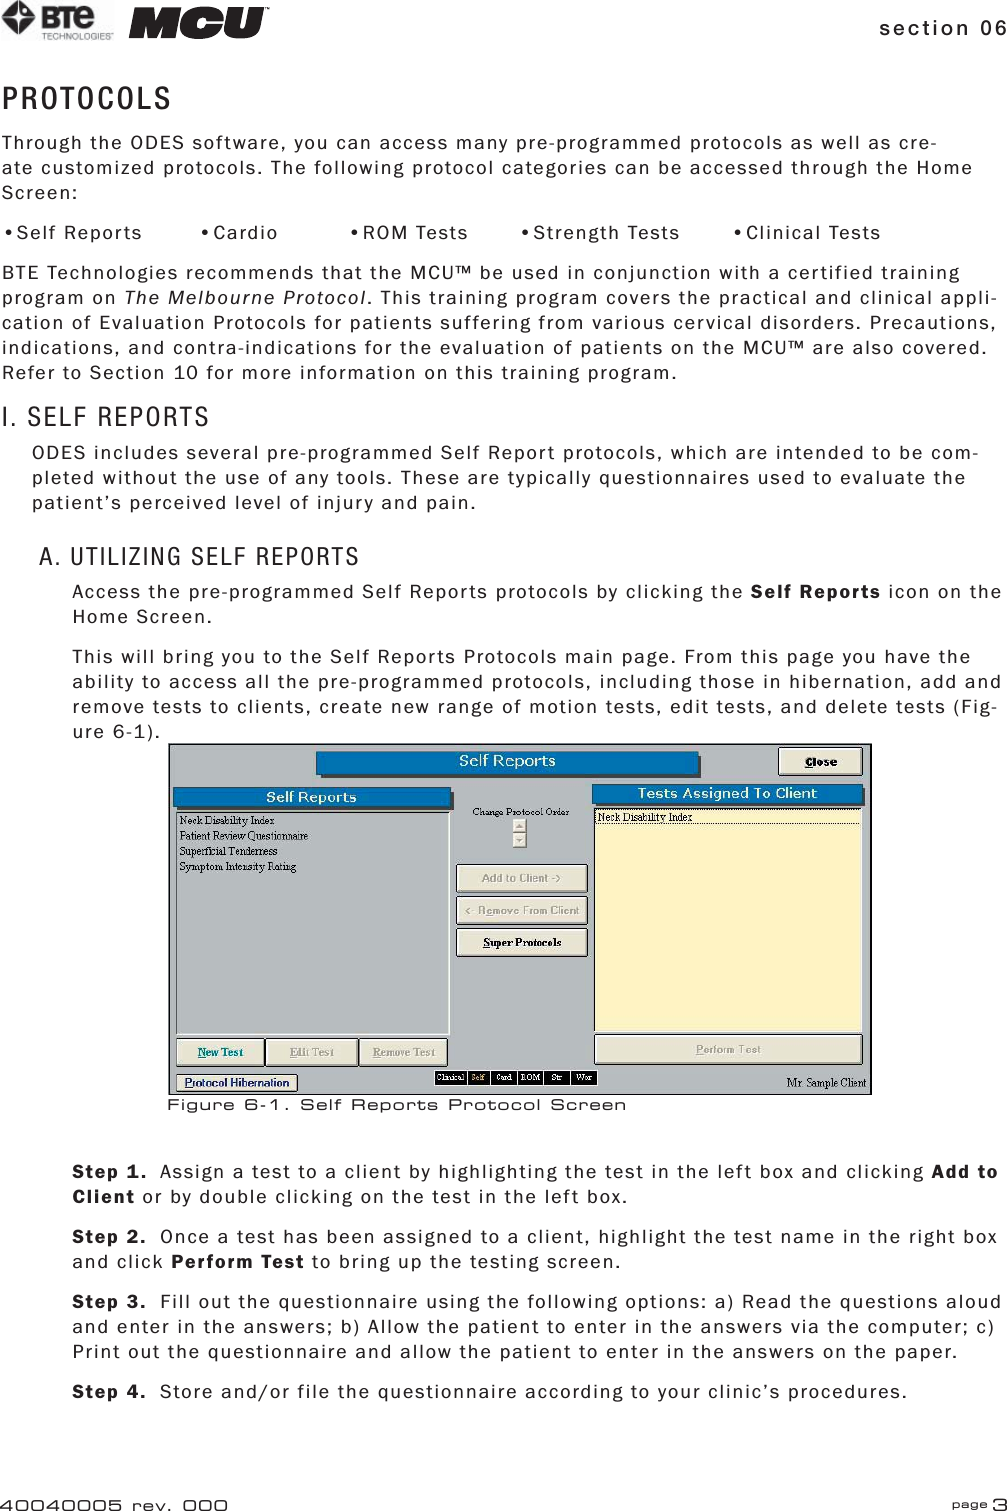 section 06 page 340040005 rev. 000PROTOCOLSThrough the ODES software, you can access many pre-programmed protocols as well as cre-ate customized protocols. The following protocol categories can be accessed through the Home Screen:•Self Reports     •Cardio    •ROM Tests  •Strength Tests    •Clinical TestsBTE Technologies recommends that the MCU™ be used in conjunction with a certified training program on The Melbourne Protocol. This training program covers the practical and clinical appli-cation of Evaluation Protocols for patients suffering from various cervical disorders. Precautions, indications, and contra-indications for the evaluation of patients on the MCU™ are also covered. Refer to Section 10 for more information on this training program.I. SELF REPORTSODES includes several pre-programmed Self Report protocols, which are intended to be com-pleted without the use of any tools. These are typically questionnaires used to evaluate the patient’s perceived level of injury and pain.A. UTILIZING SELF REPORTSAccess the pre-programmed Self Reports protocols by clicking the Self Reports icon on the Home Screen.This will bring you to the Self Reports Protocols main page. From this page you have the ability to access all the pre-programmed protocols, including those in hibernation, add and remove tests to clients, create new range of motion tests, edit tests, and delete tests (Fig-ure 6-1).Step 1.  Assign a test to a client by highlighting the test in the left box and clicking Add to Client or by double clicking on the test in the left box.Step 2.  Once a test has been assigned to a client, highlight the test name in the right box and click Perform Test to bring up the testing screen.Step 3.  Fill out the questionnaire using the following options: a) Read the questions aloud and enter in the answers; b) Allow the patient to enter in the answers via the computer; c) Print out the questionnaire and allow the patient to enter in the answers on the paper.Step 4.  Store and/or file the questionnaire according to your clinic’s procedures.Figure 6-1. Self Reports Protocol Screen